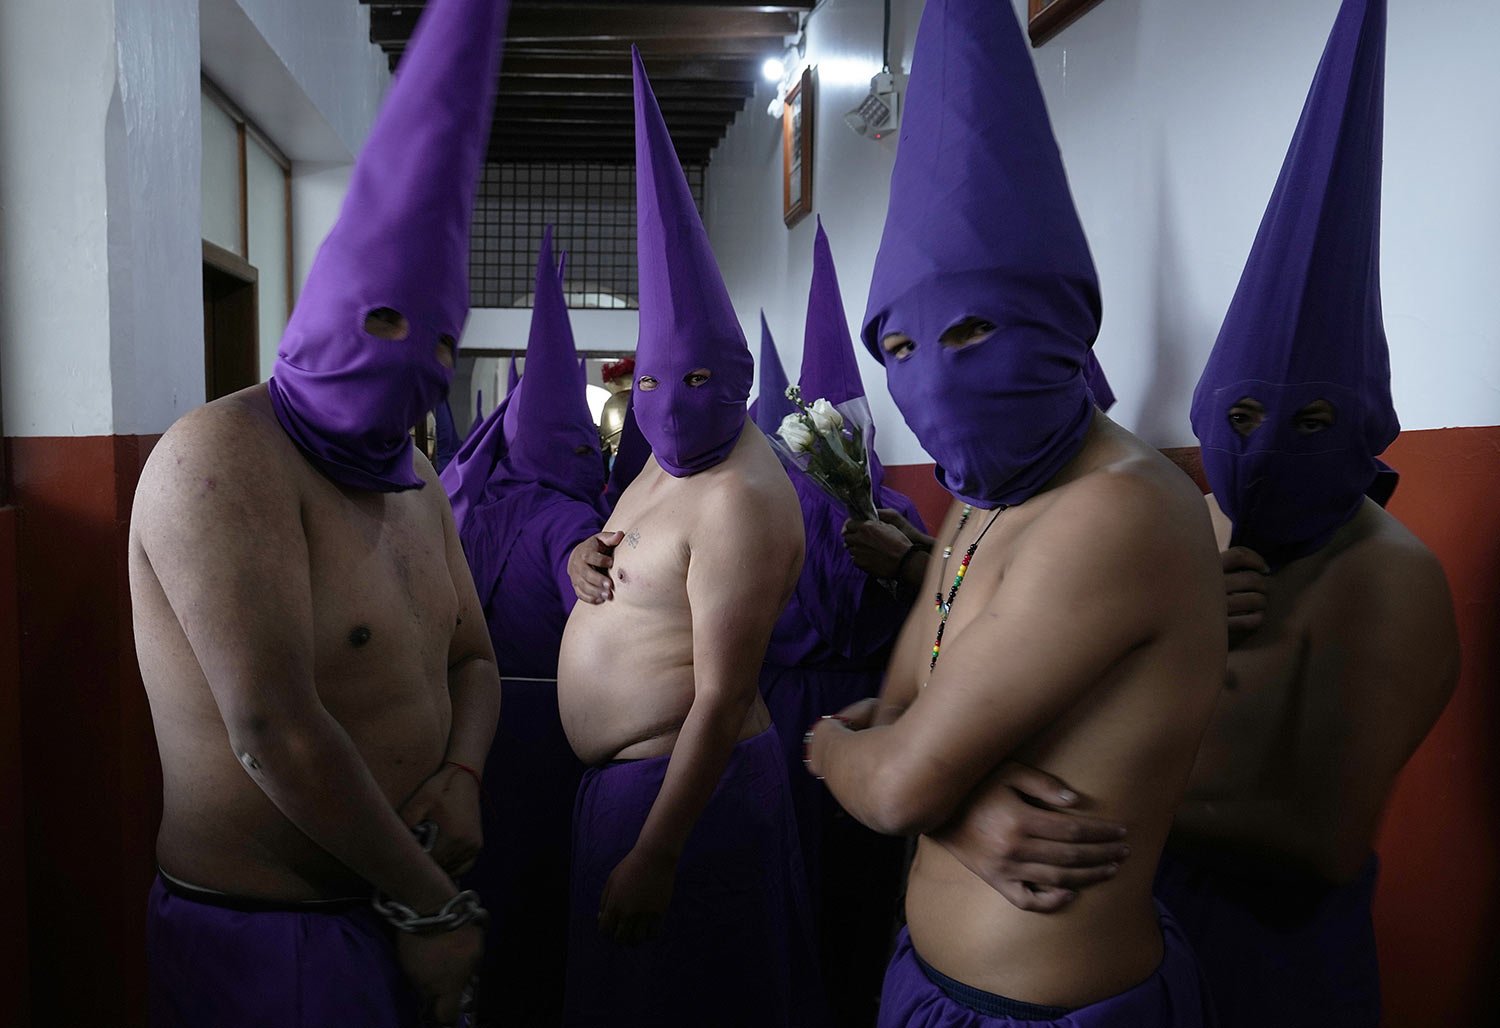  Hooded penitents known as "cucuruchos" pose for a photo in the San Francisco church as they wait for the start of the Jesus of Great Power procession in Quito, Ecuador, April 15, 2022. (AP Photo/Dolores Ochoa) 